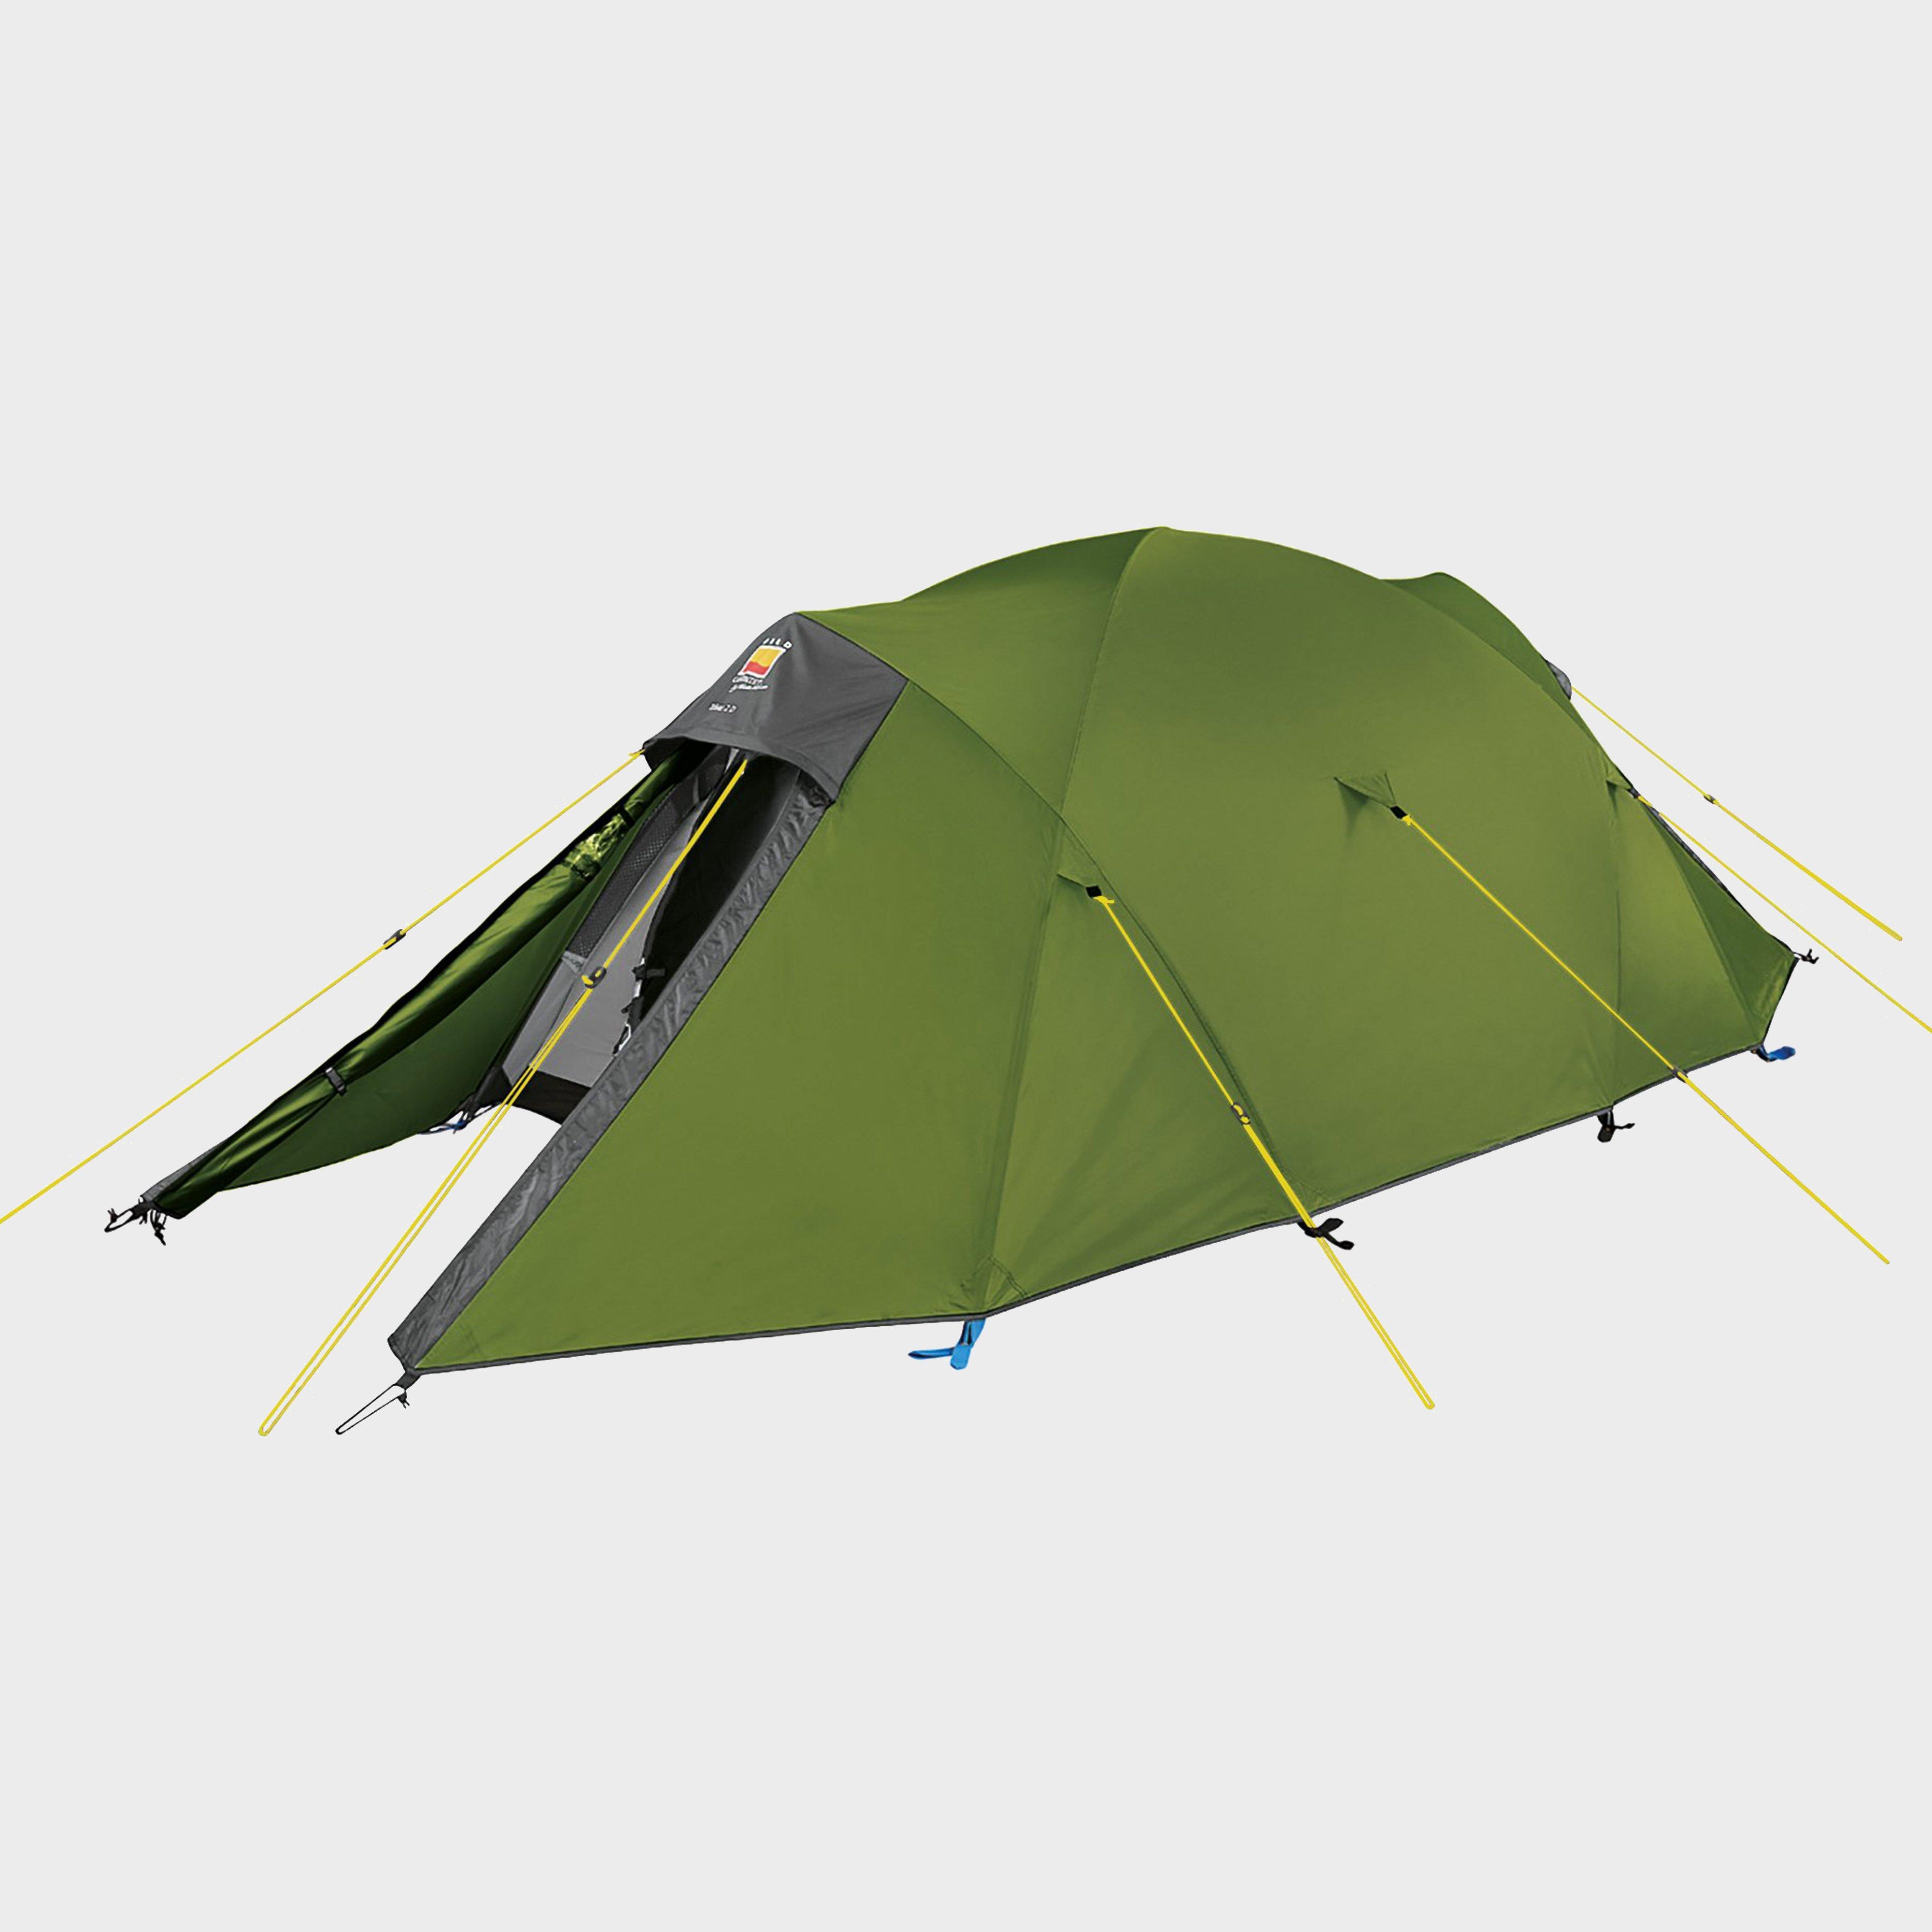 Wild Country Trisar 2 Tent - Green/mgn  Green/mgn